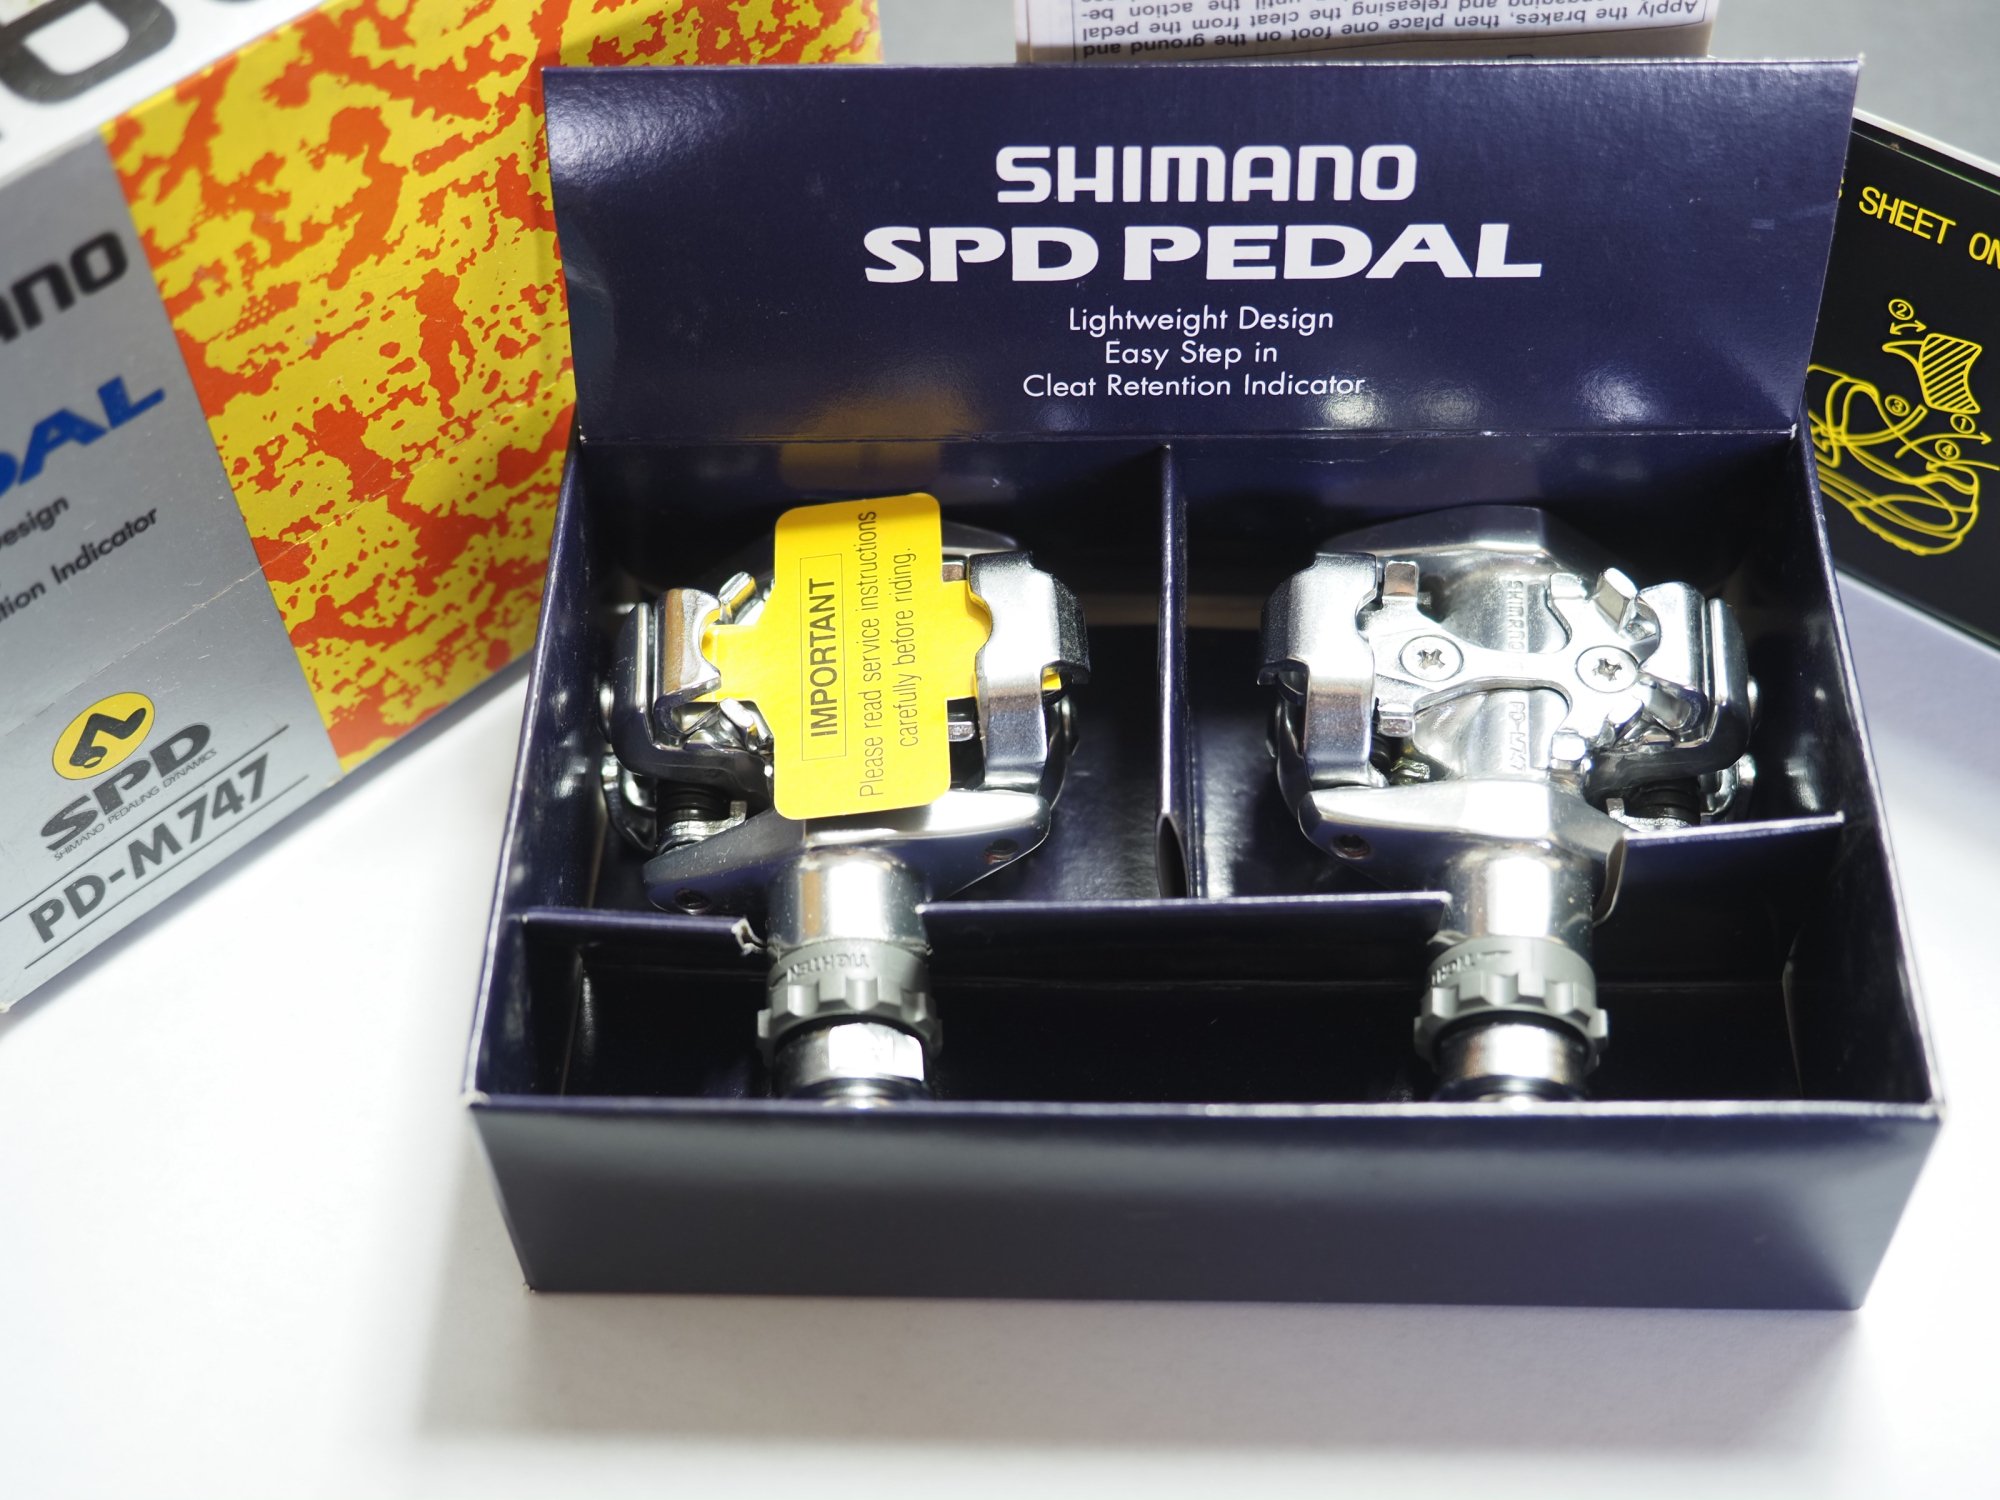 <img class='new_mark_img1' src='https://img.shop-pro.jp/img/new/icons13.gif' style='border:none;display:inline;margin:0px;padding:0px;width:auto;' />SHIMANO XTR PD-M747